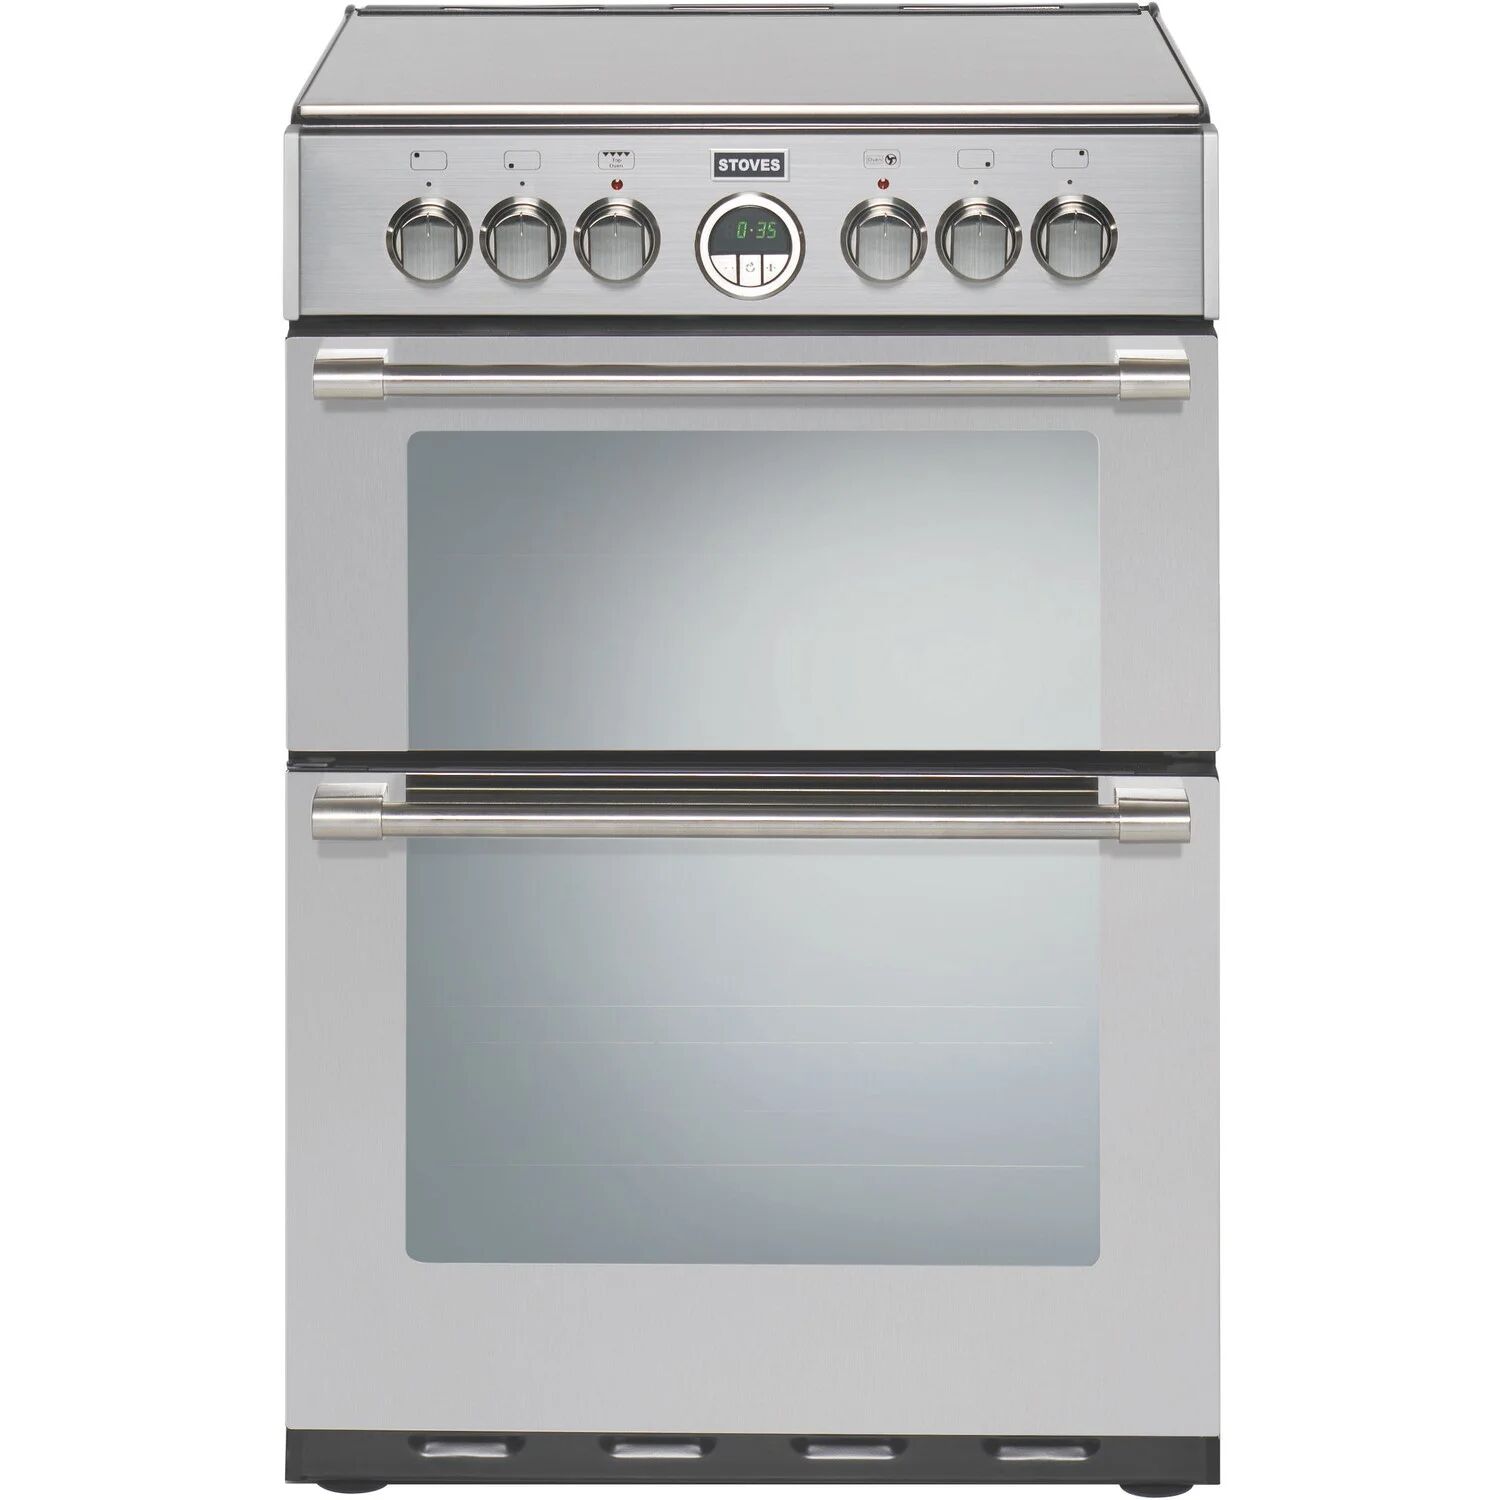 Stoves Sterling 600E 60cm Double Oven Electric Cooker with Ceramic Hob - Stainless Steel